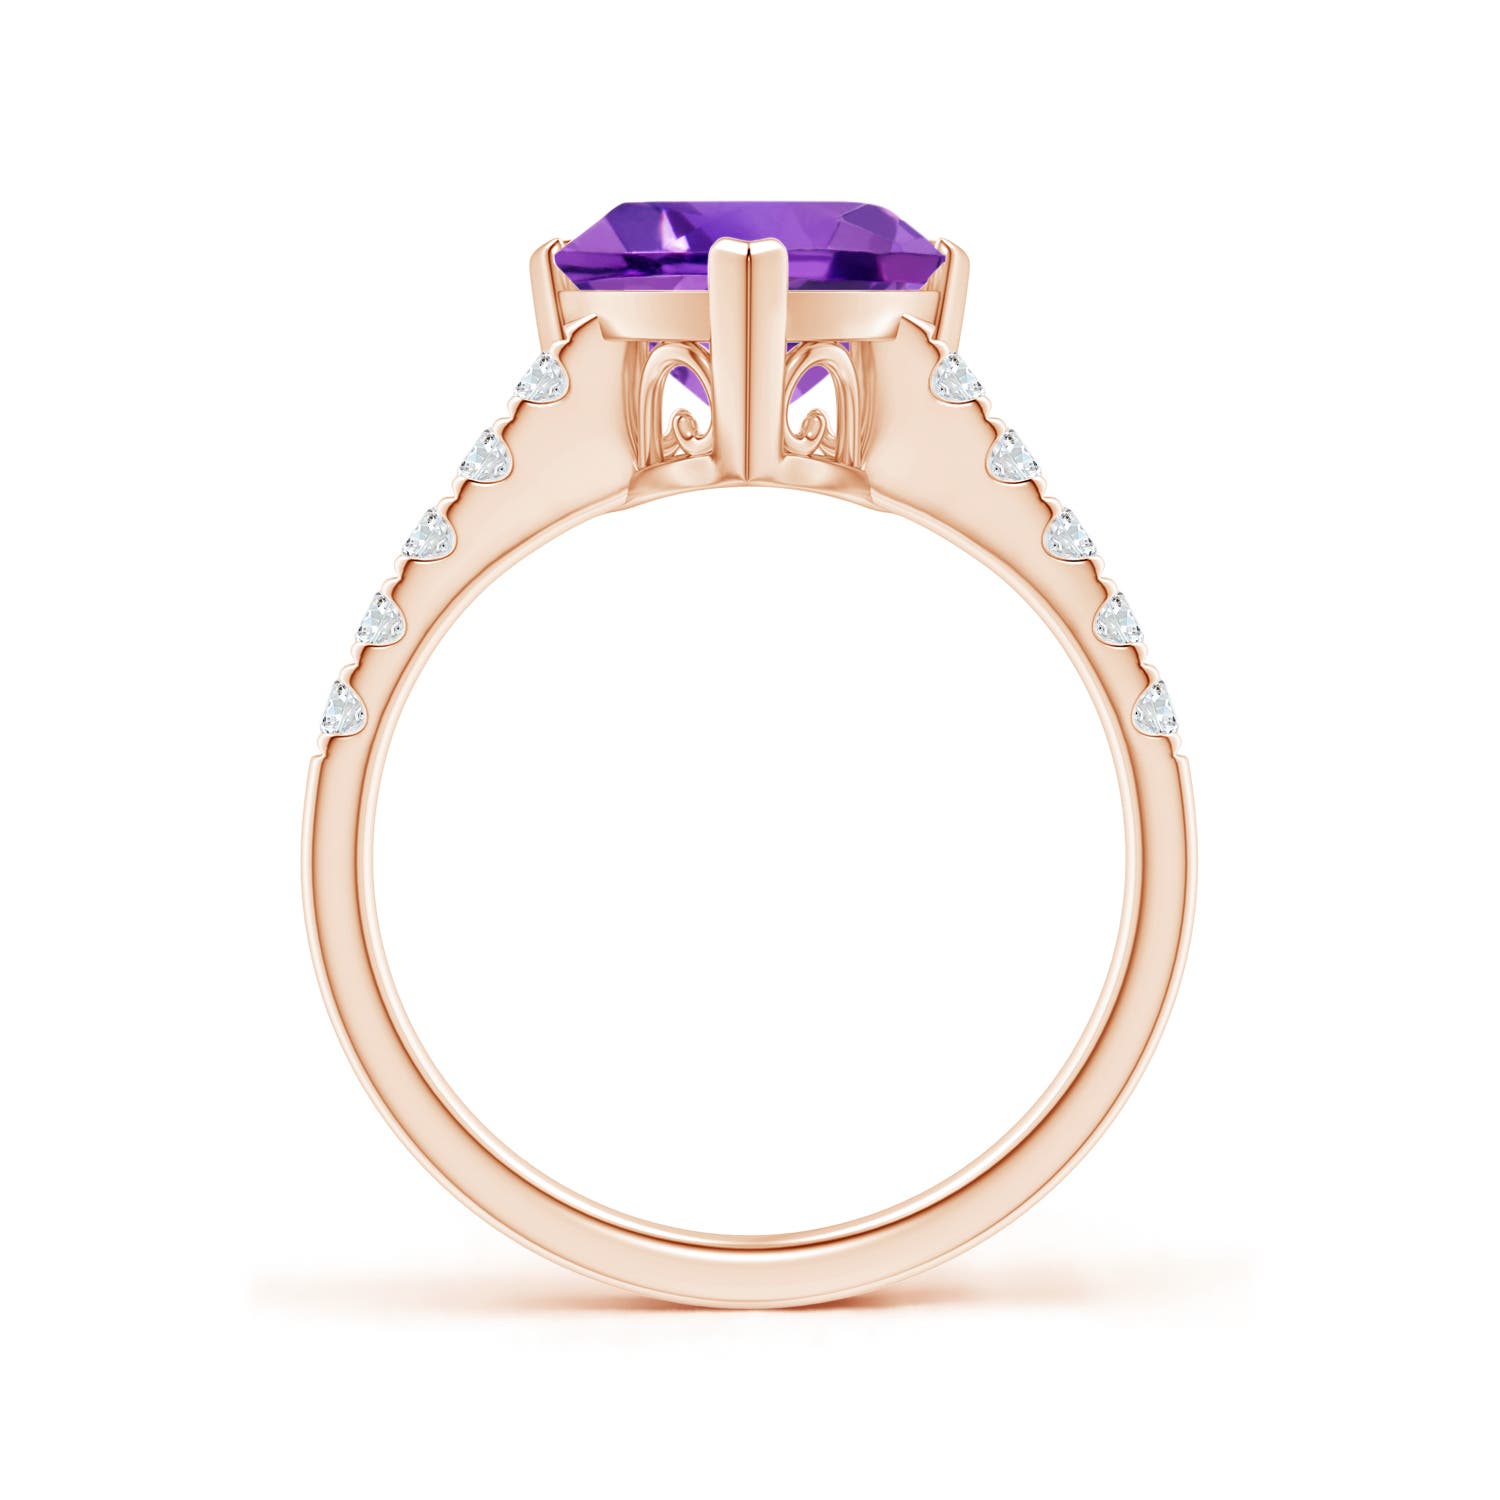 AAA - Amethyst / 2.53 CT / 14 KT Rose Gold